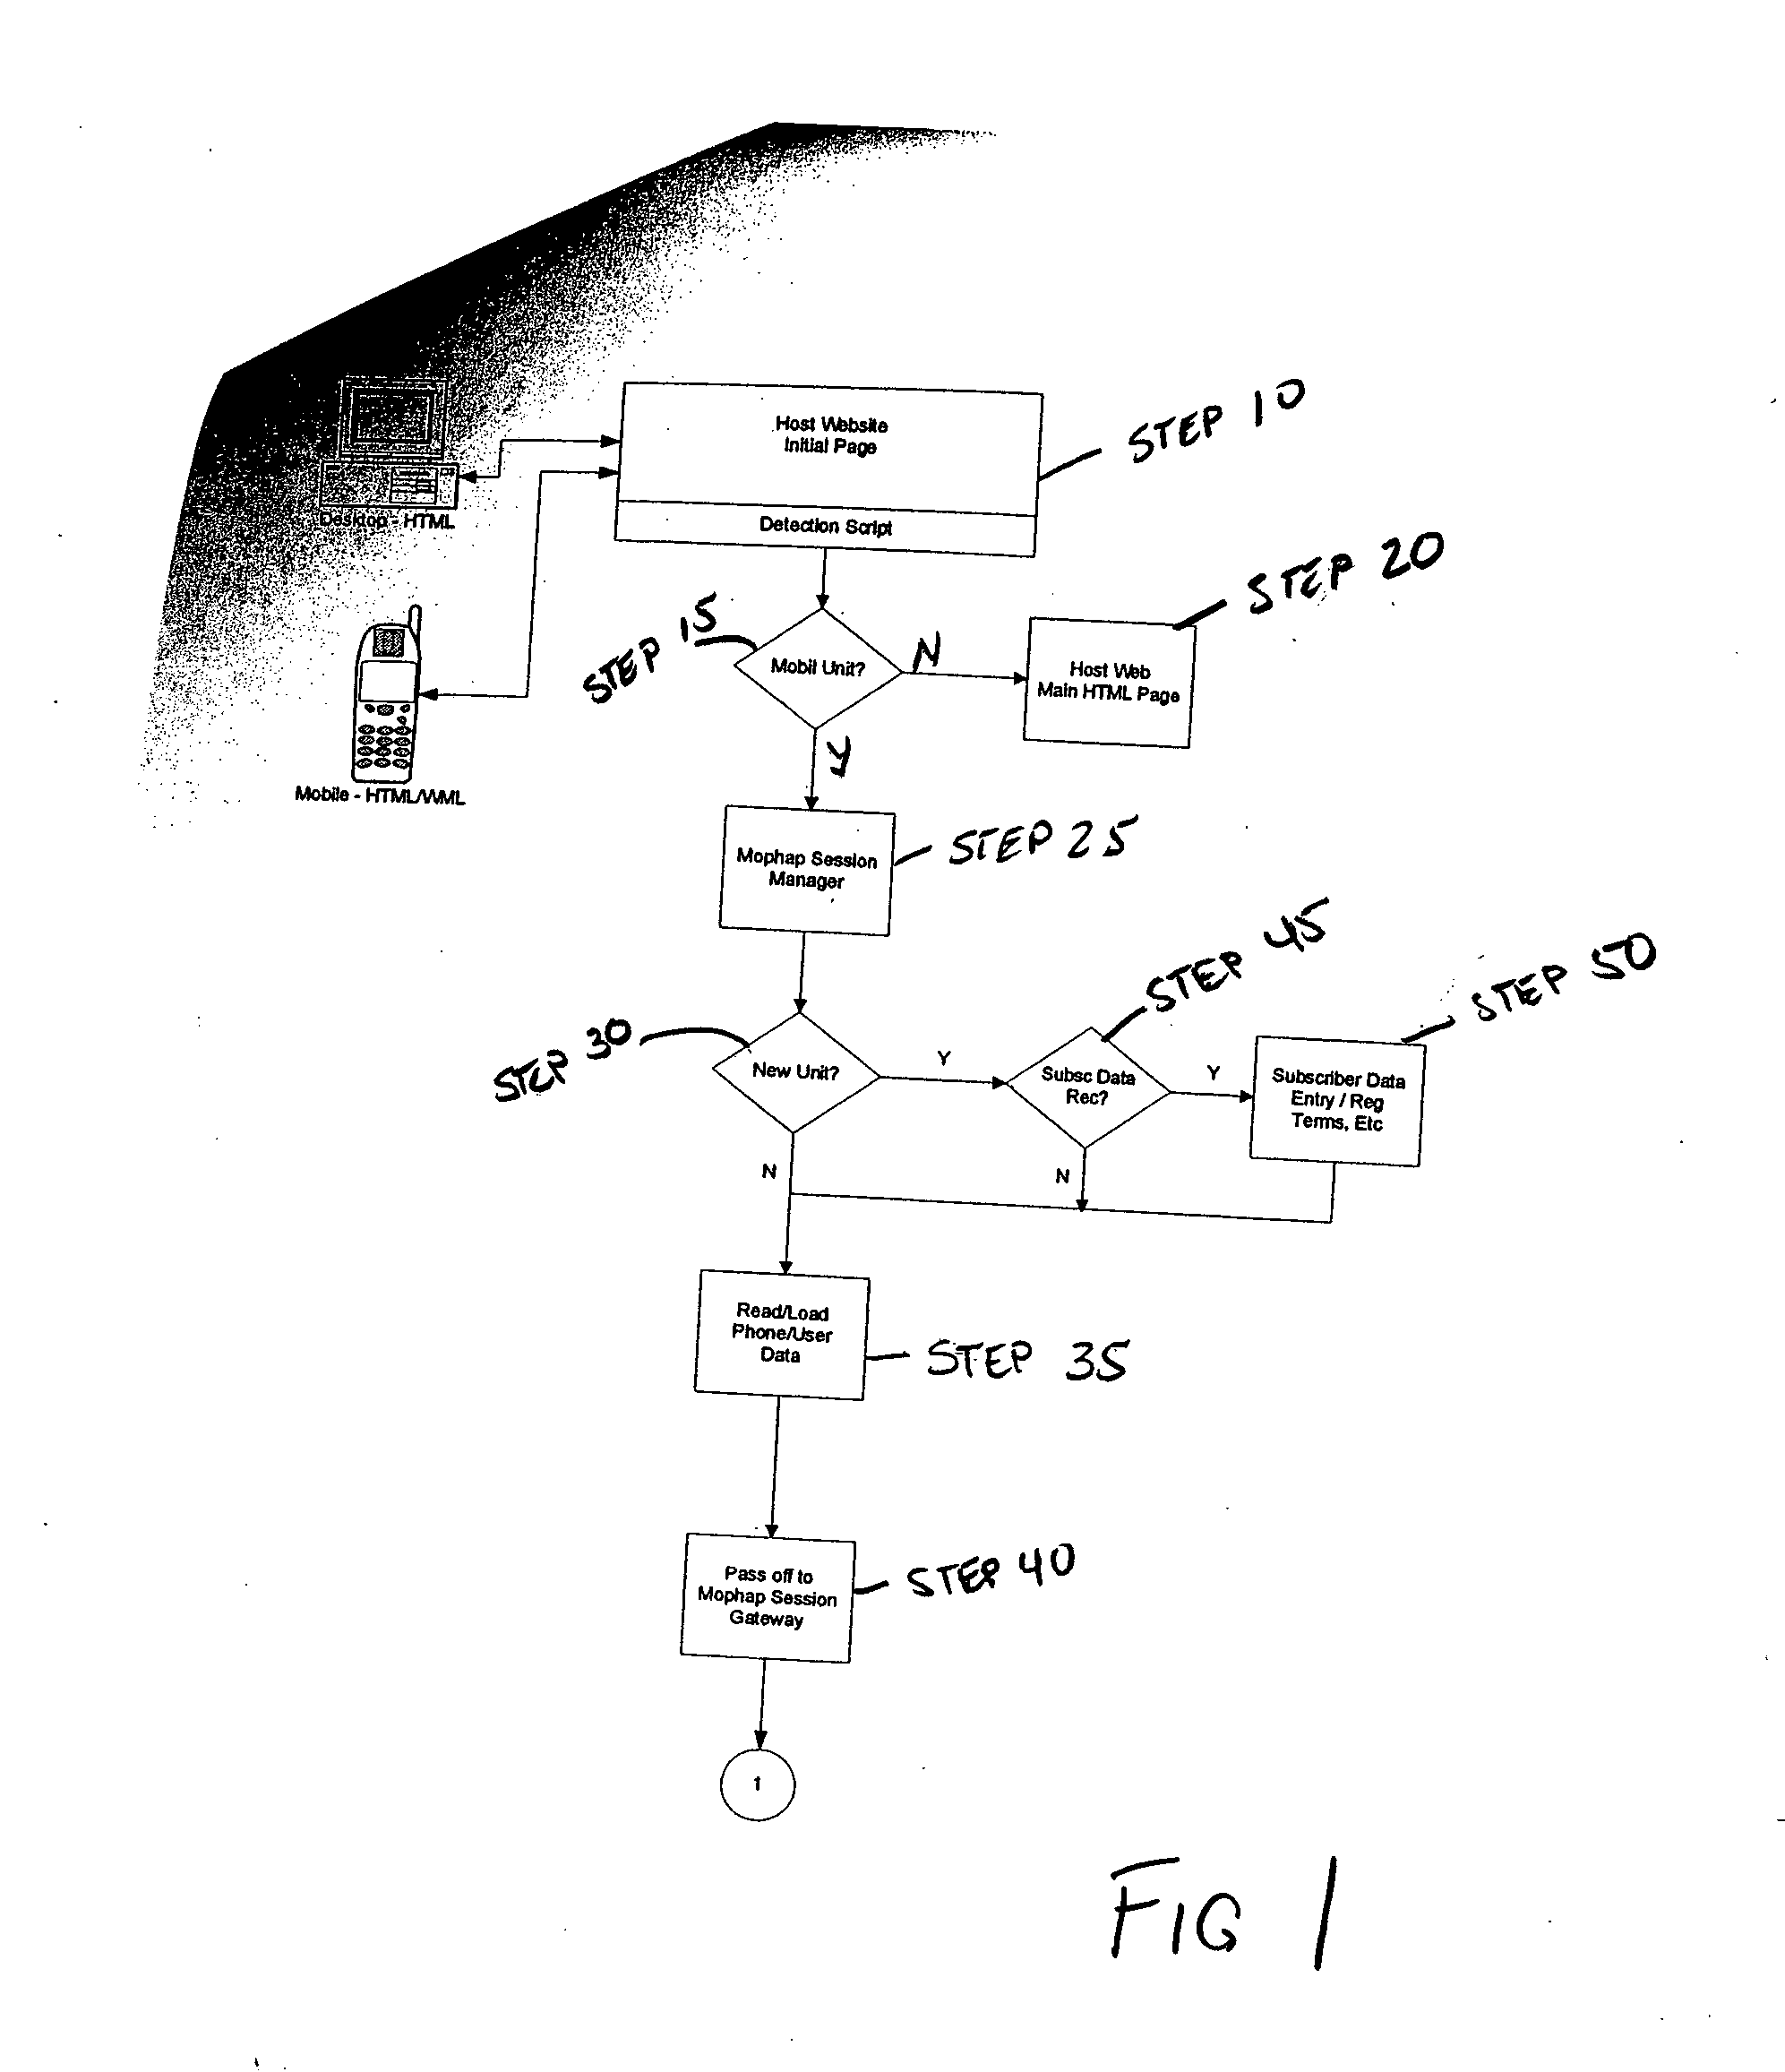 System and method for providing content to a mobile communication device